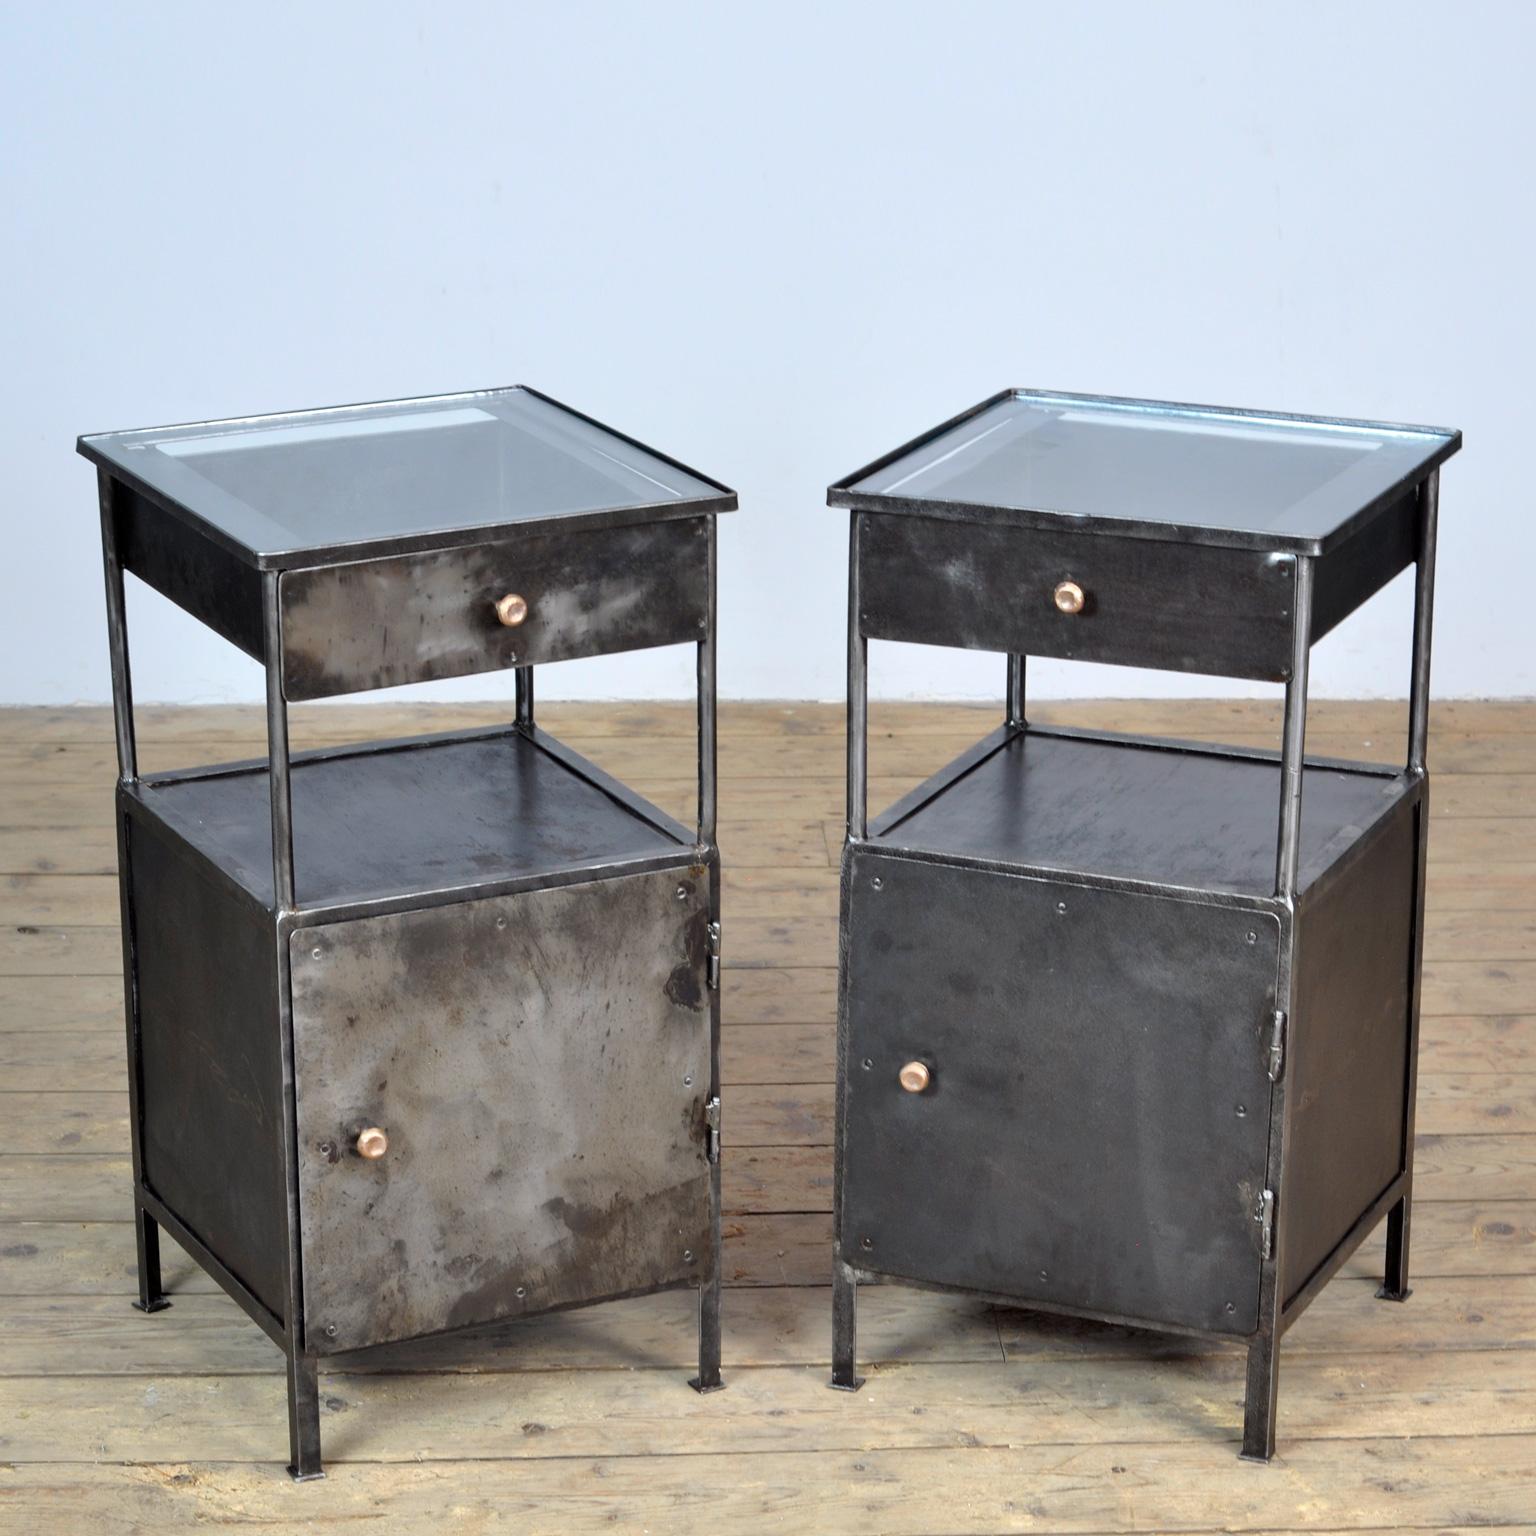 Set of iron polished hospital bedside cabinet. With one drawer and a glass top. Produced in the 1920's.